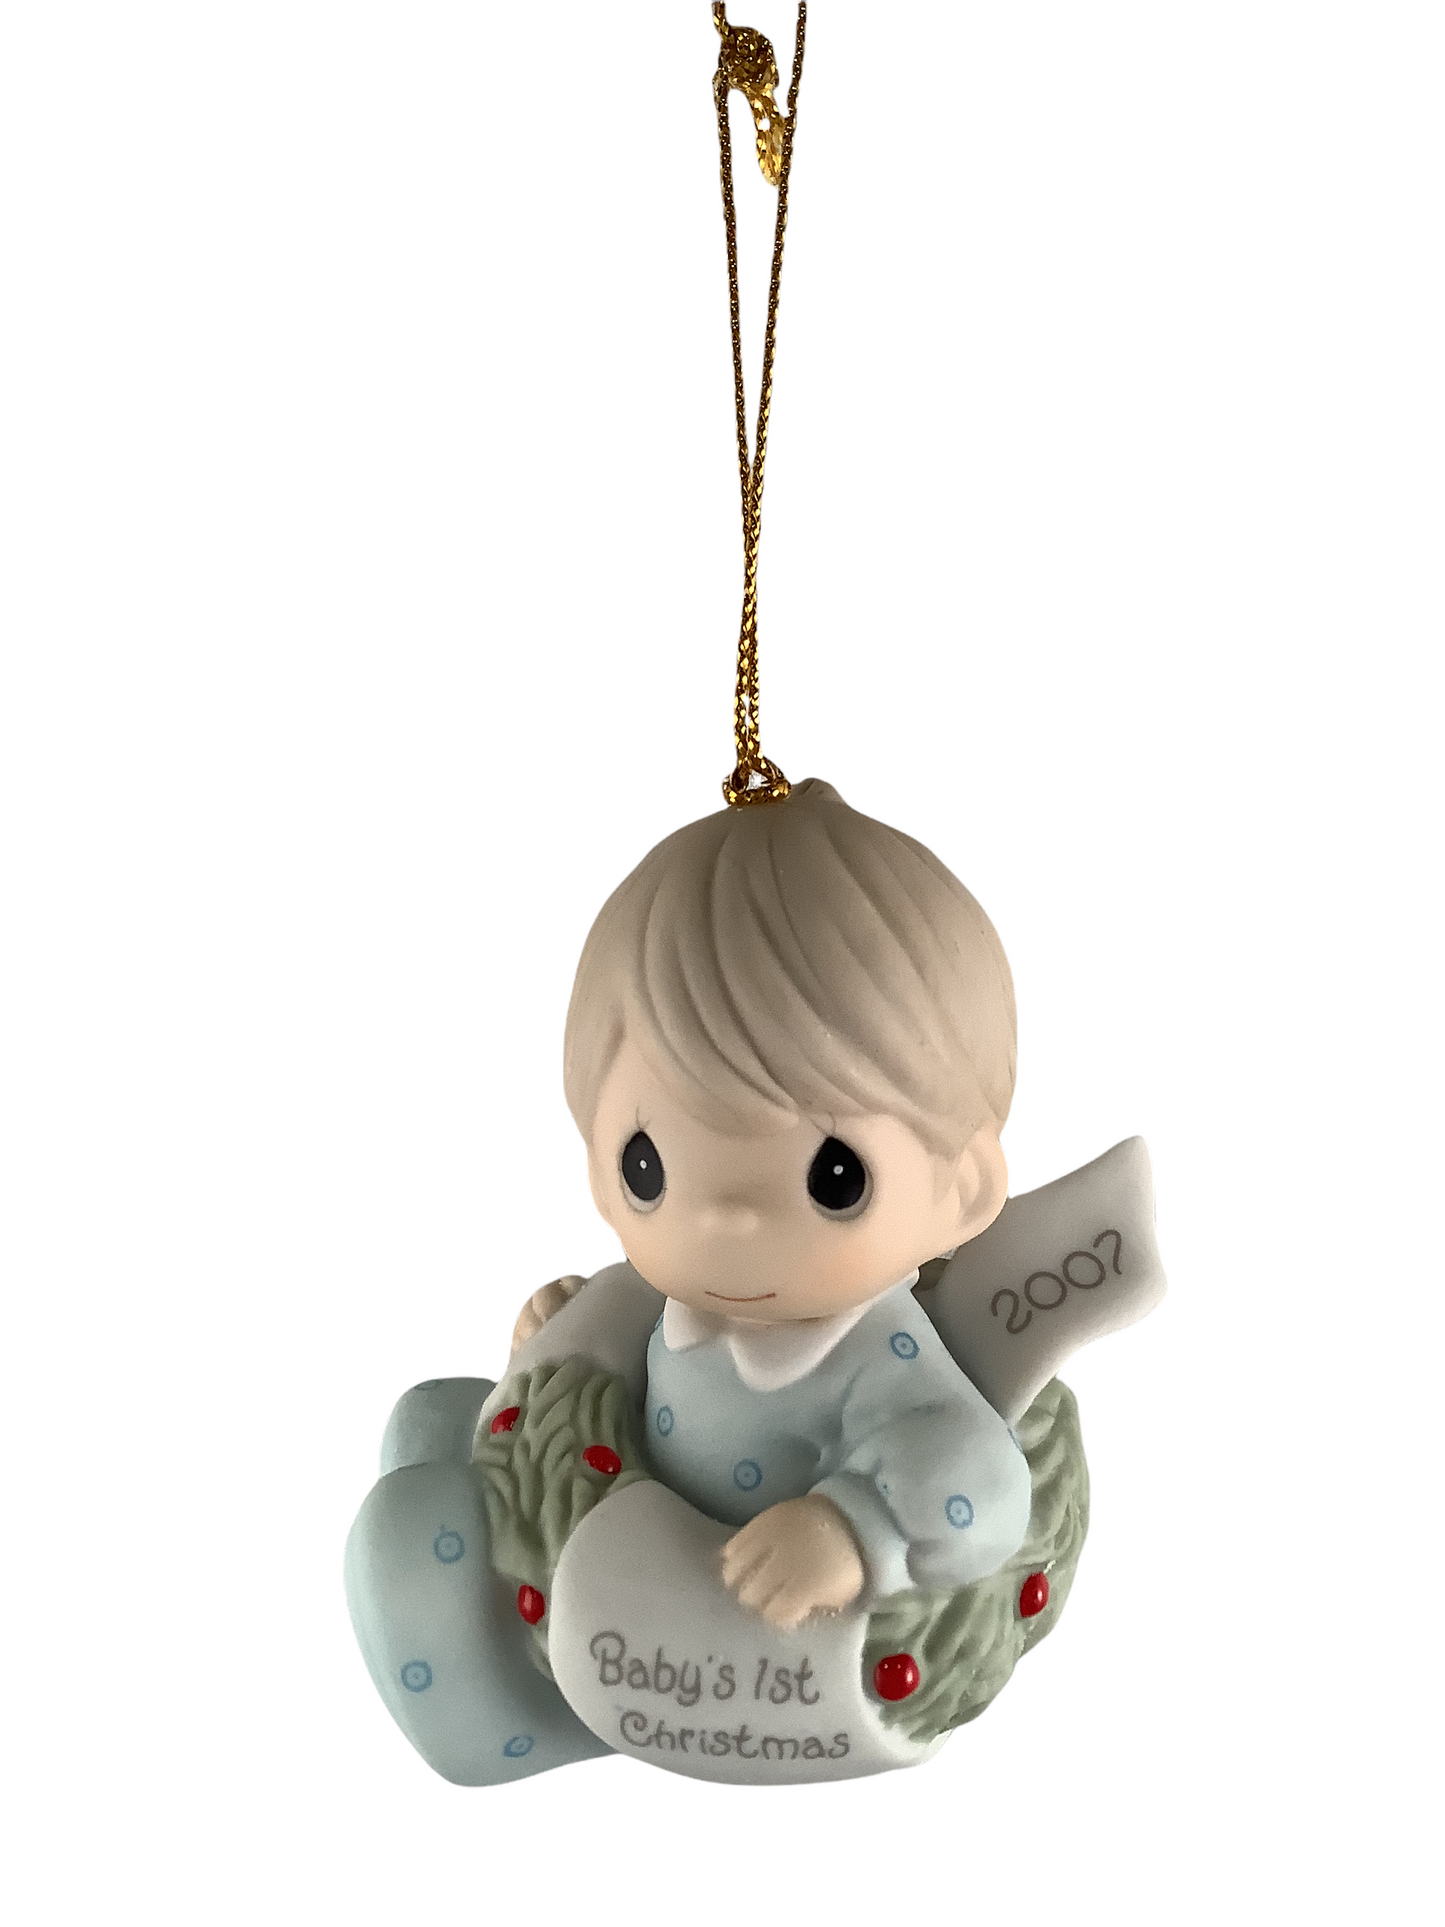 Baby's First Christmas 2007 (Boy) - Precious Moment Ornament